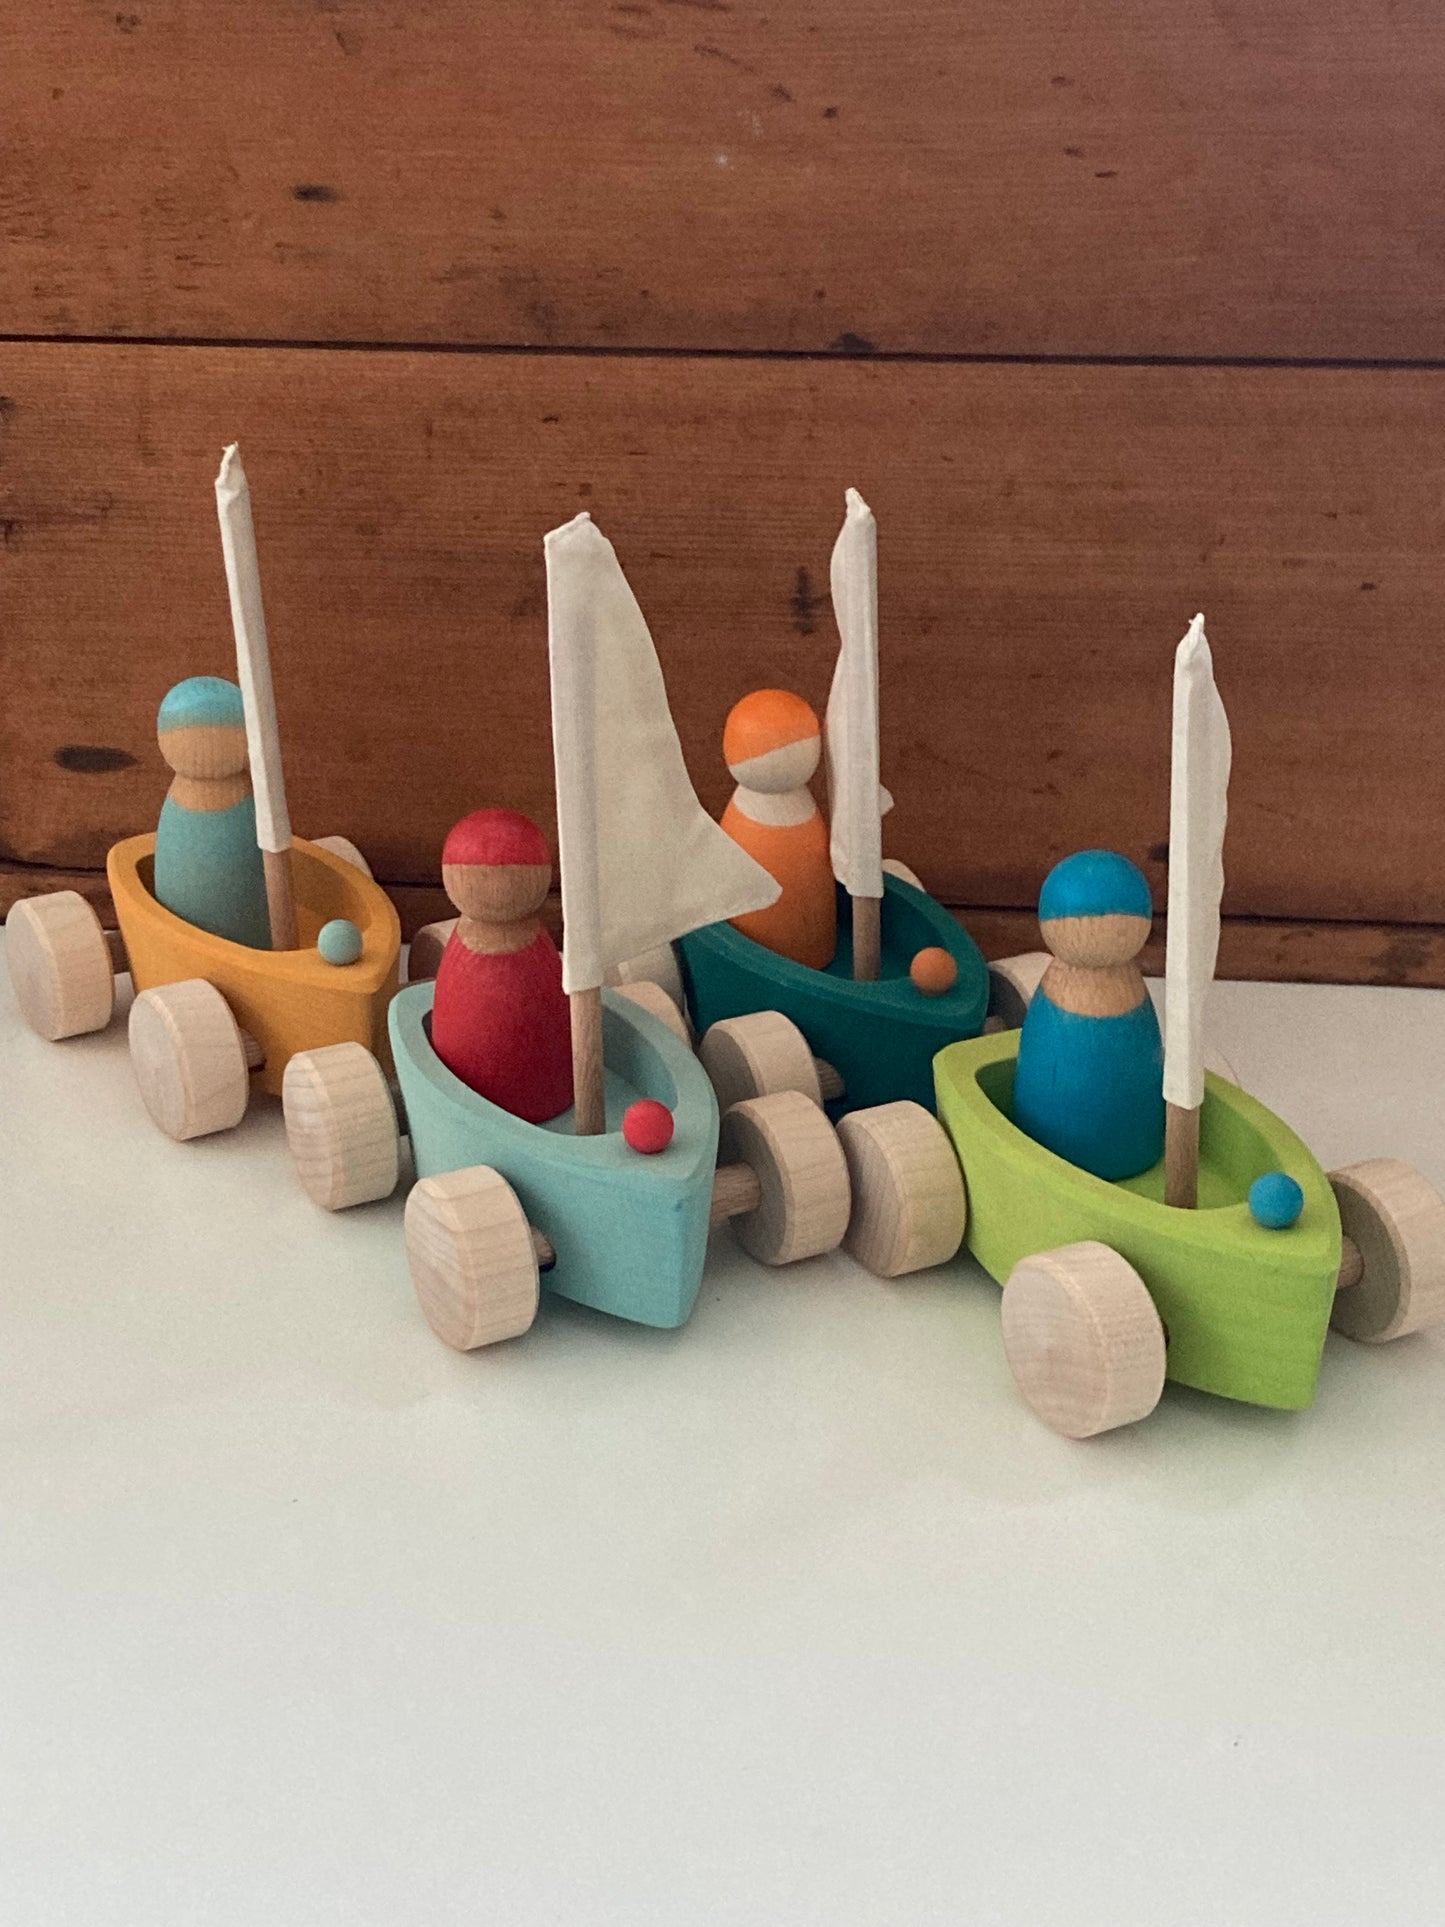 Wooden Toy - SAILBOAT in BLUE and SKIPPER in RED… on wheels!